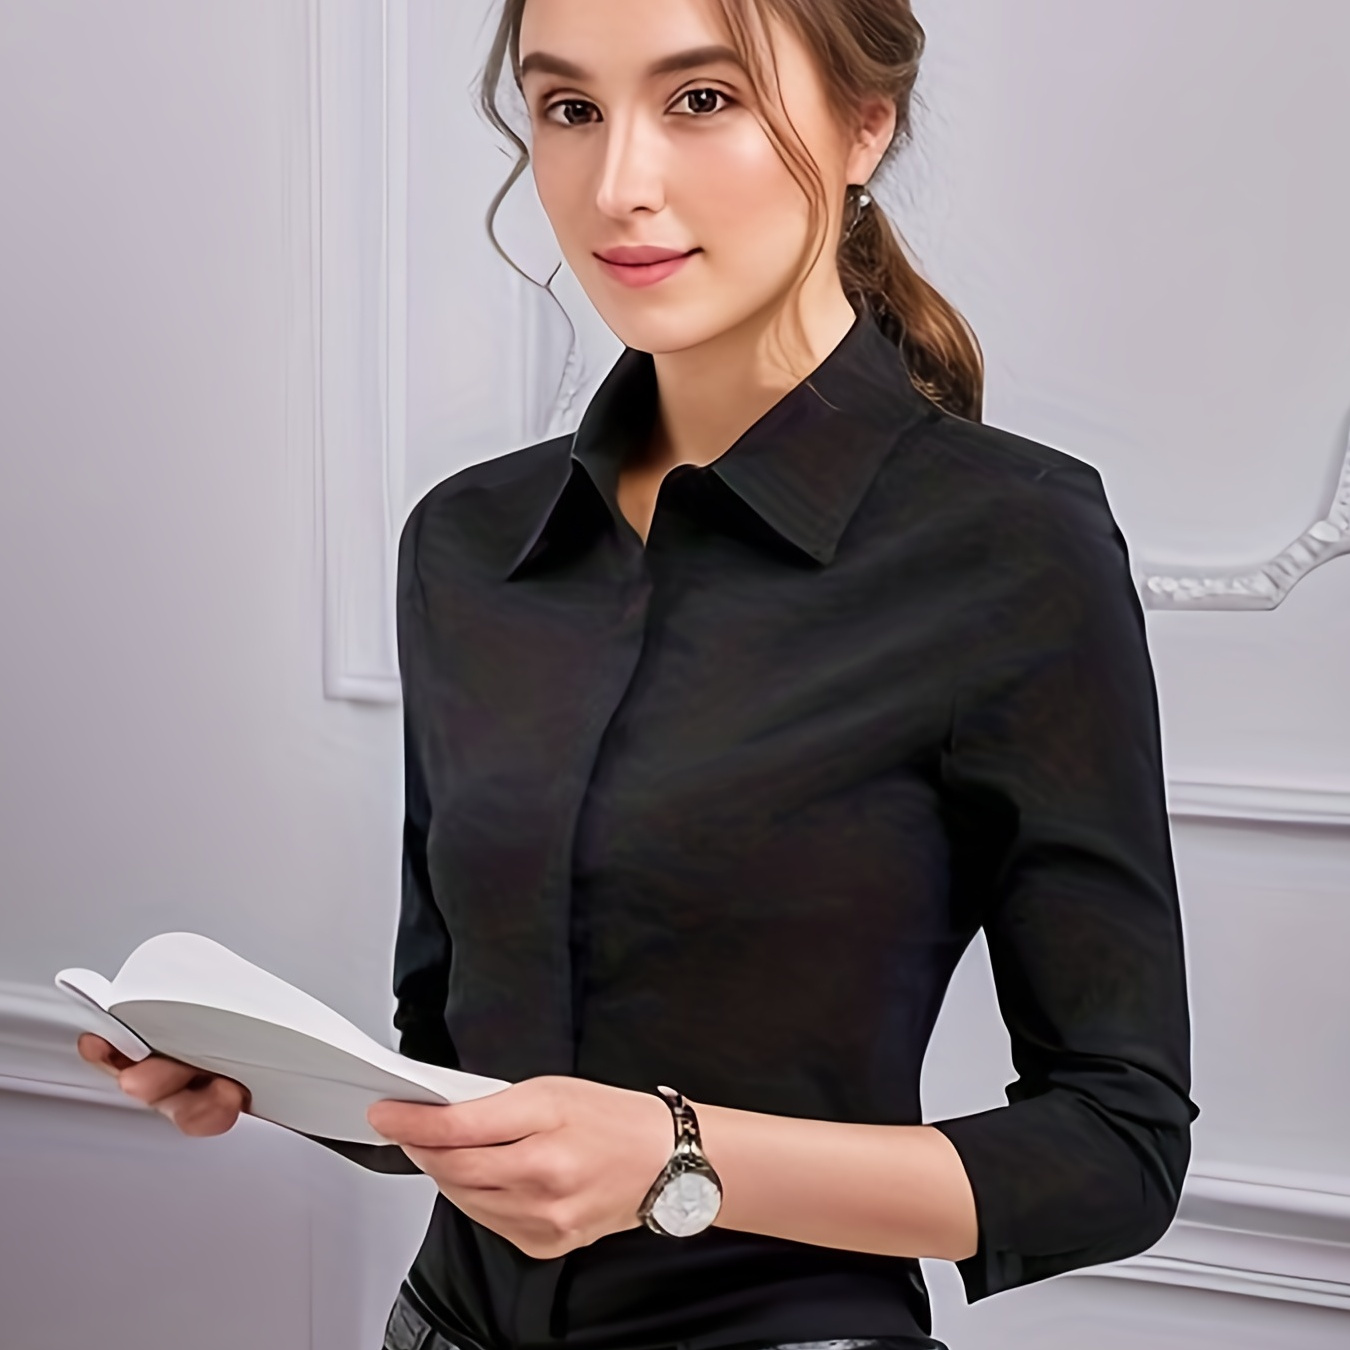 

Professional Women's Black Long Sleeve Top - Versatile And Stylish Shirt For Work And Beyond - Perfect For Fall & Winter